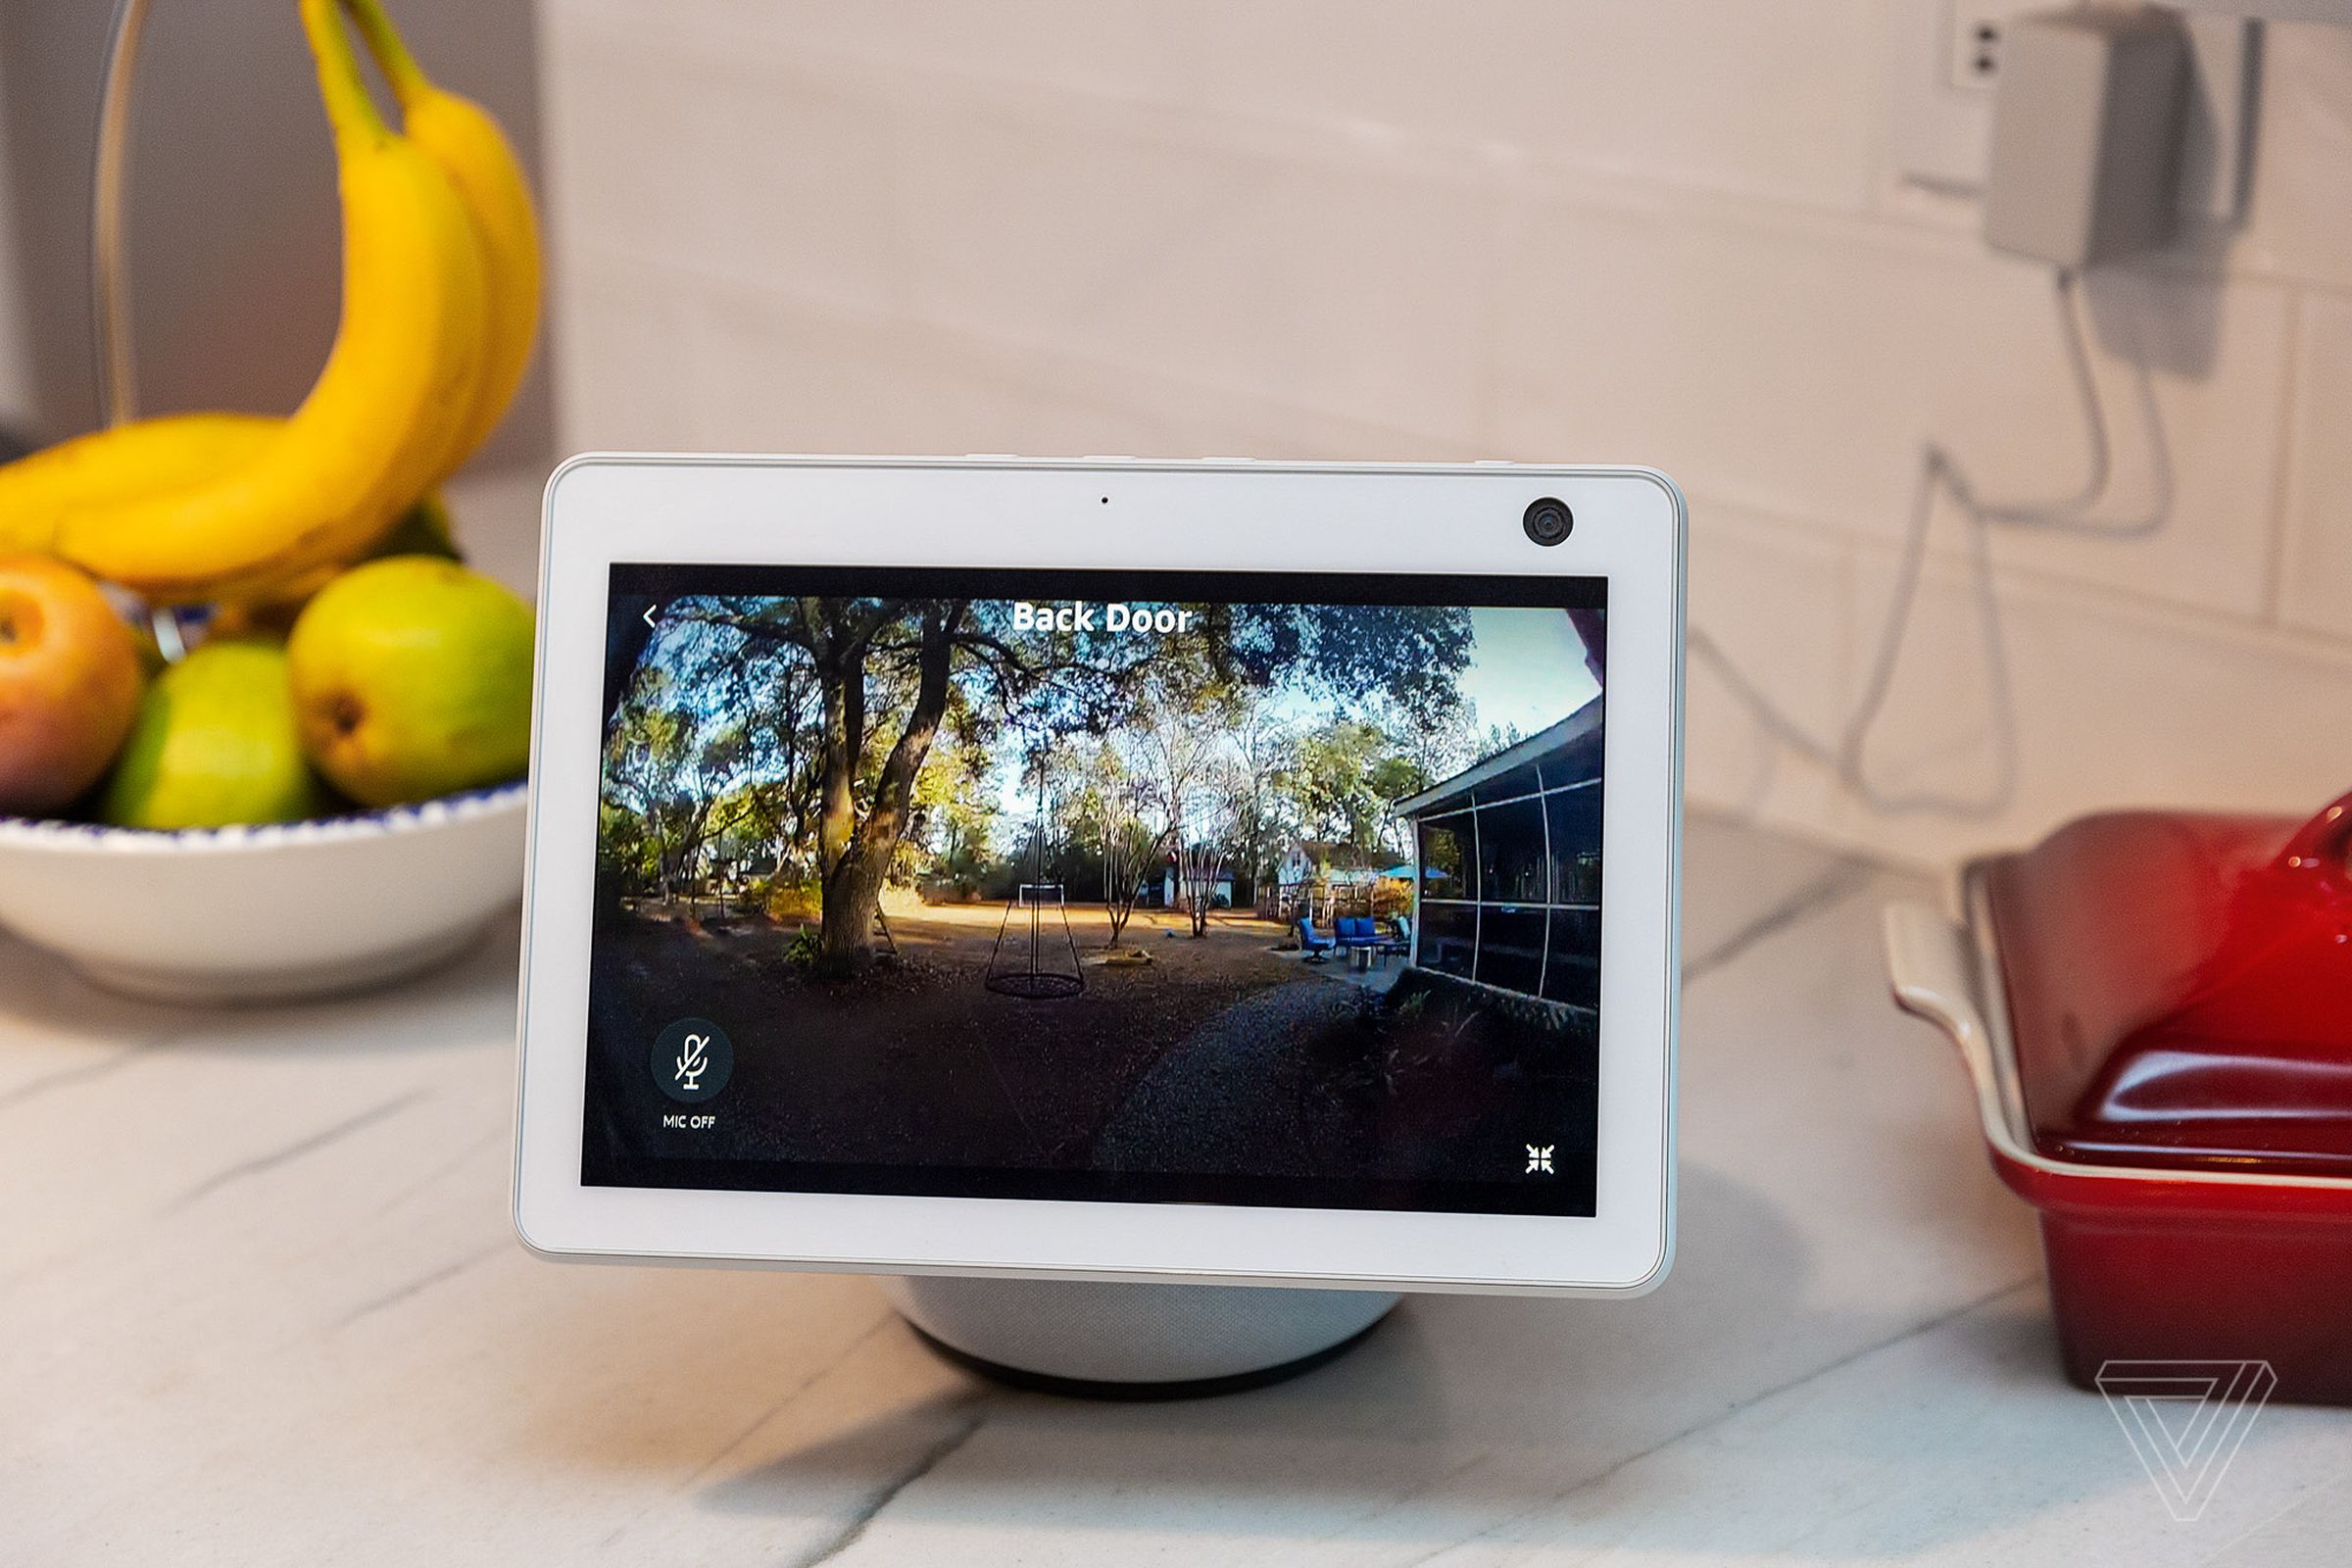 An Echo Show 10 with a live view of the Ring Video Doorbell 4. The microphone in the bottom left corner indicates you can talk to a visitor through the display.